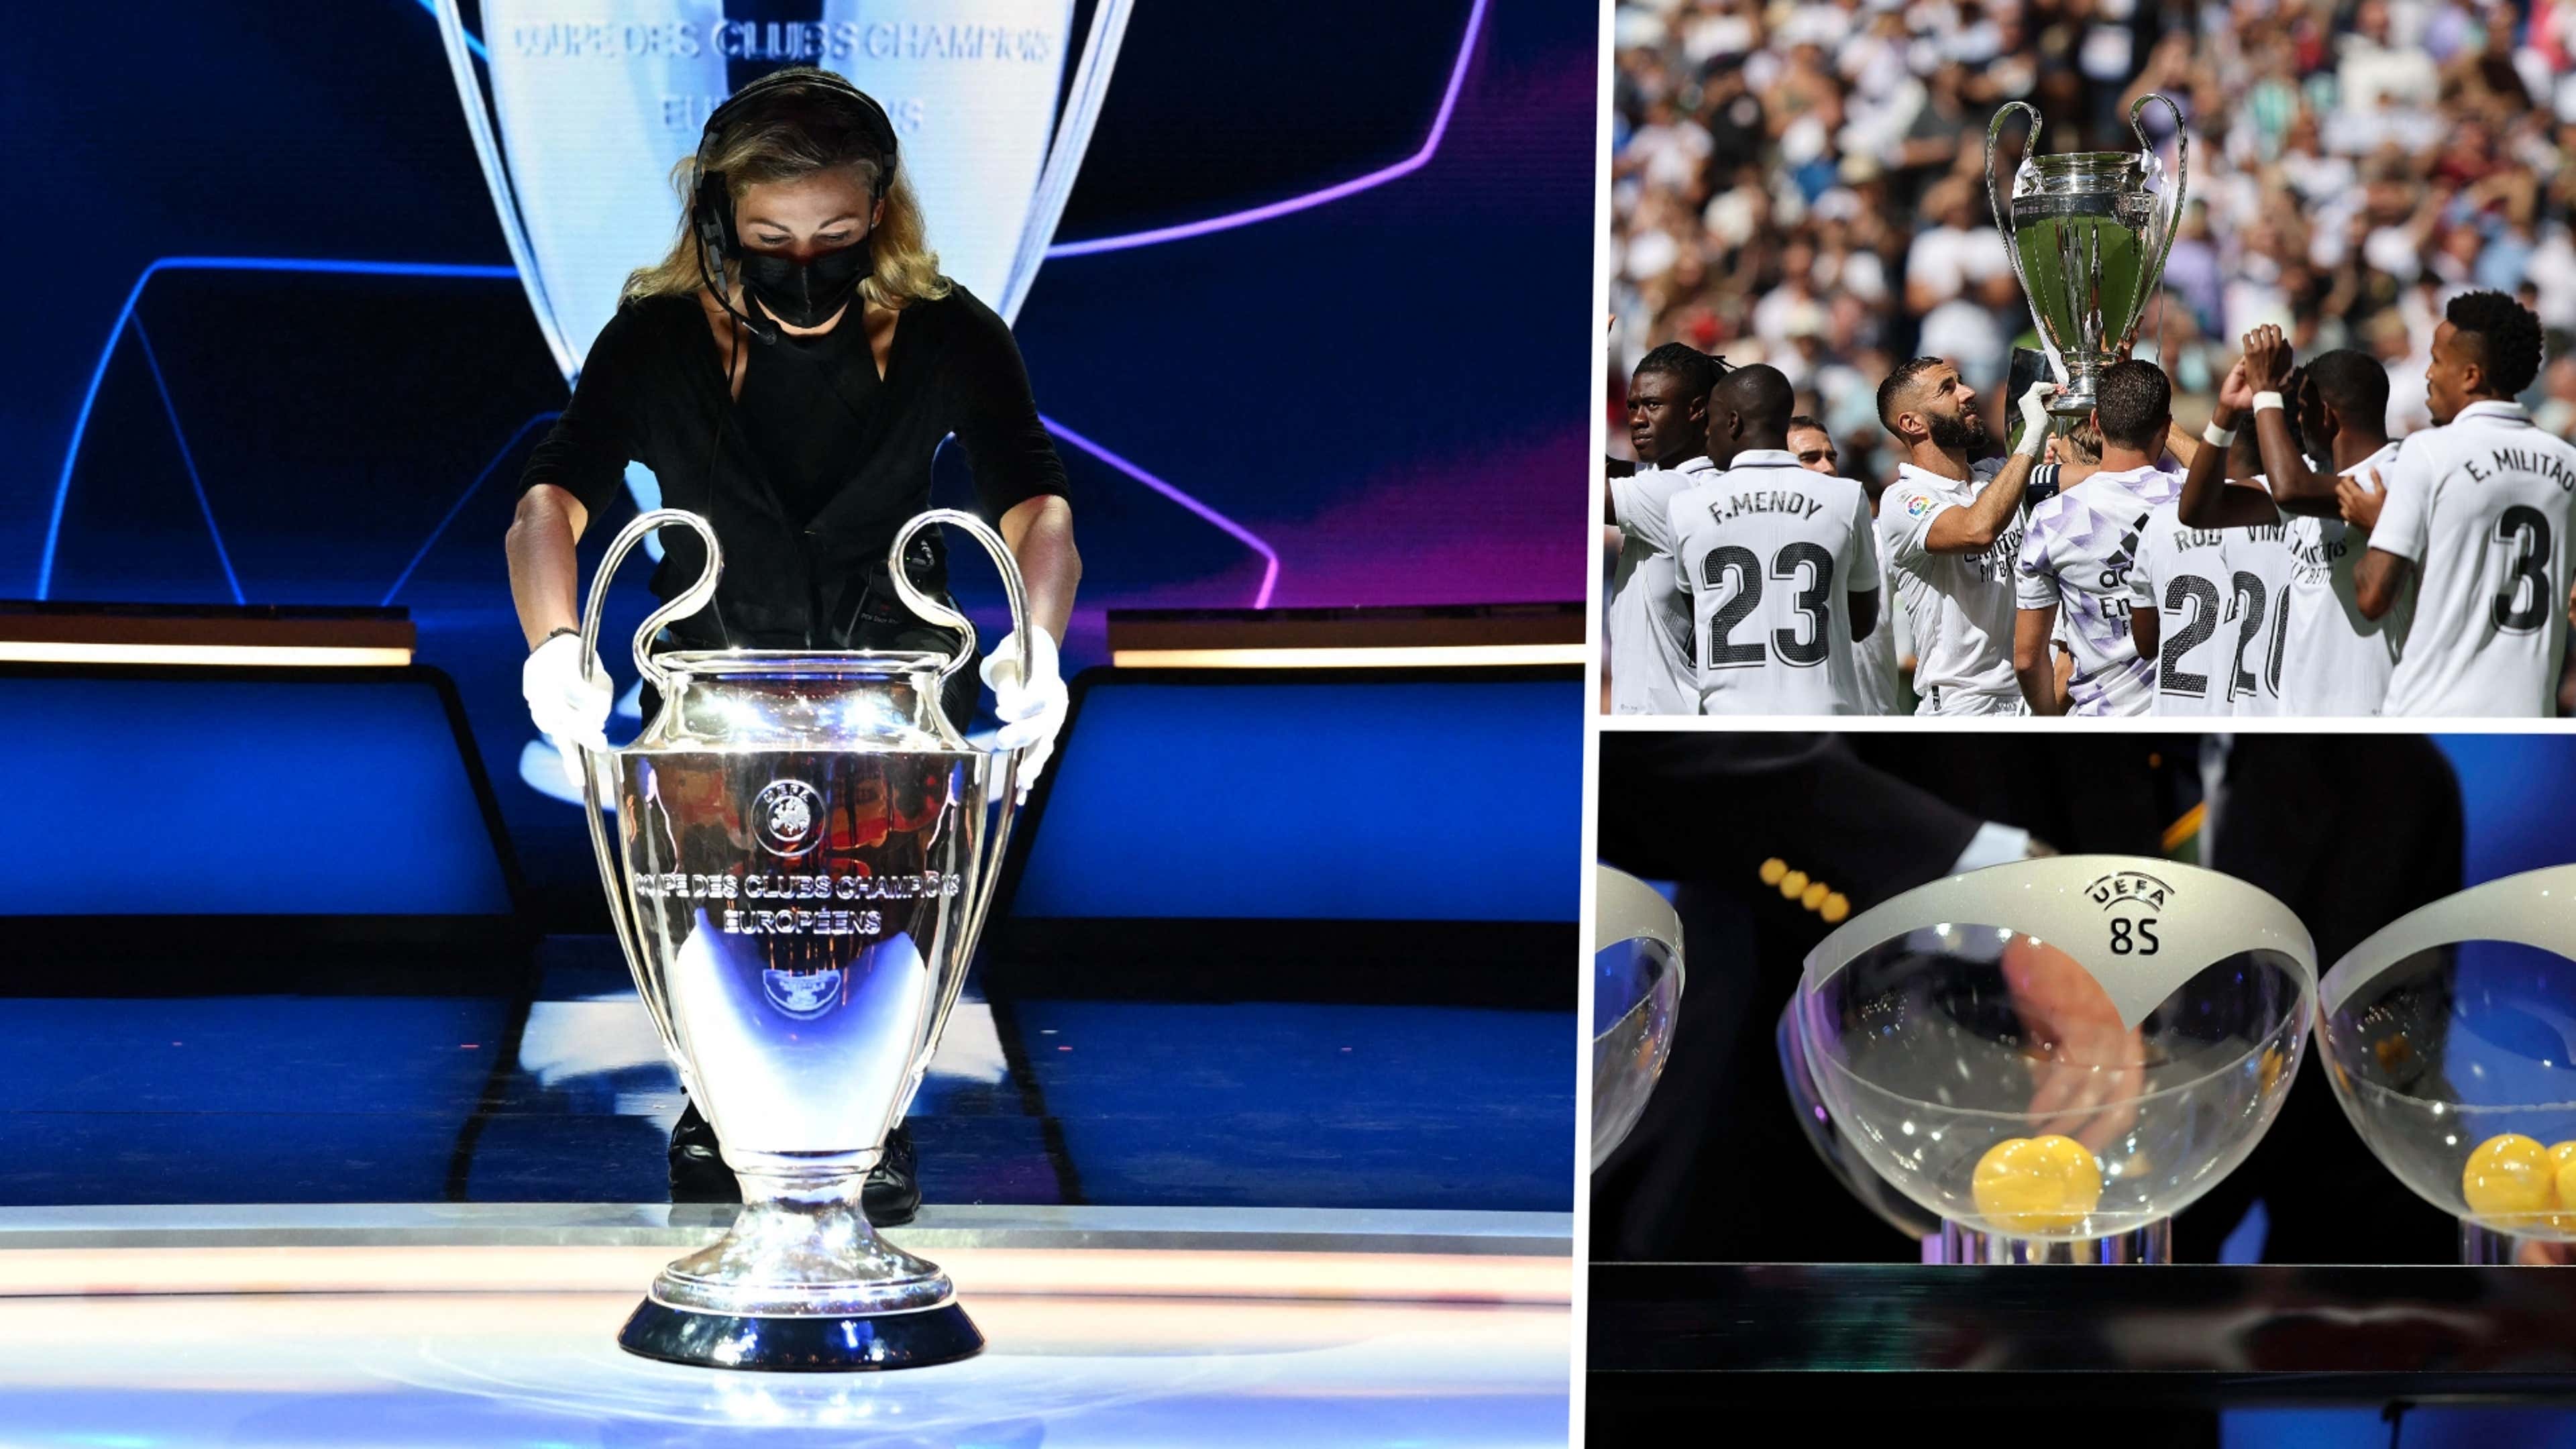 Women's Champions League: How to watch the 2022/23 tournament for free